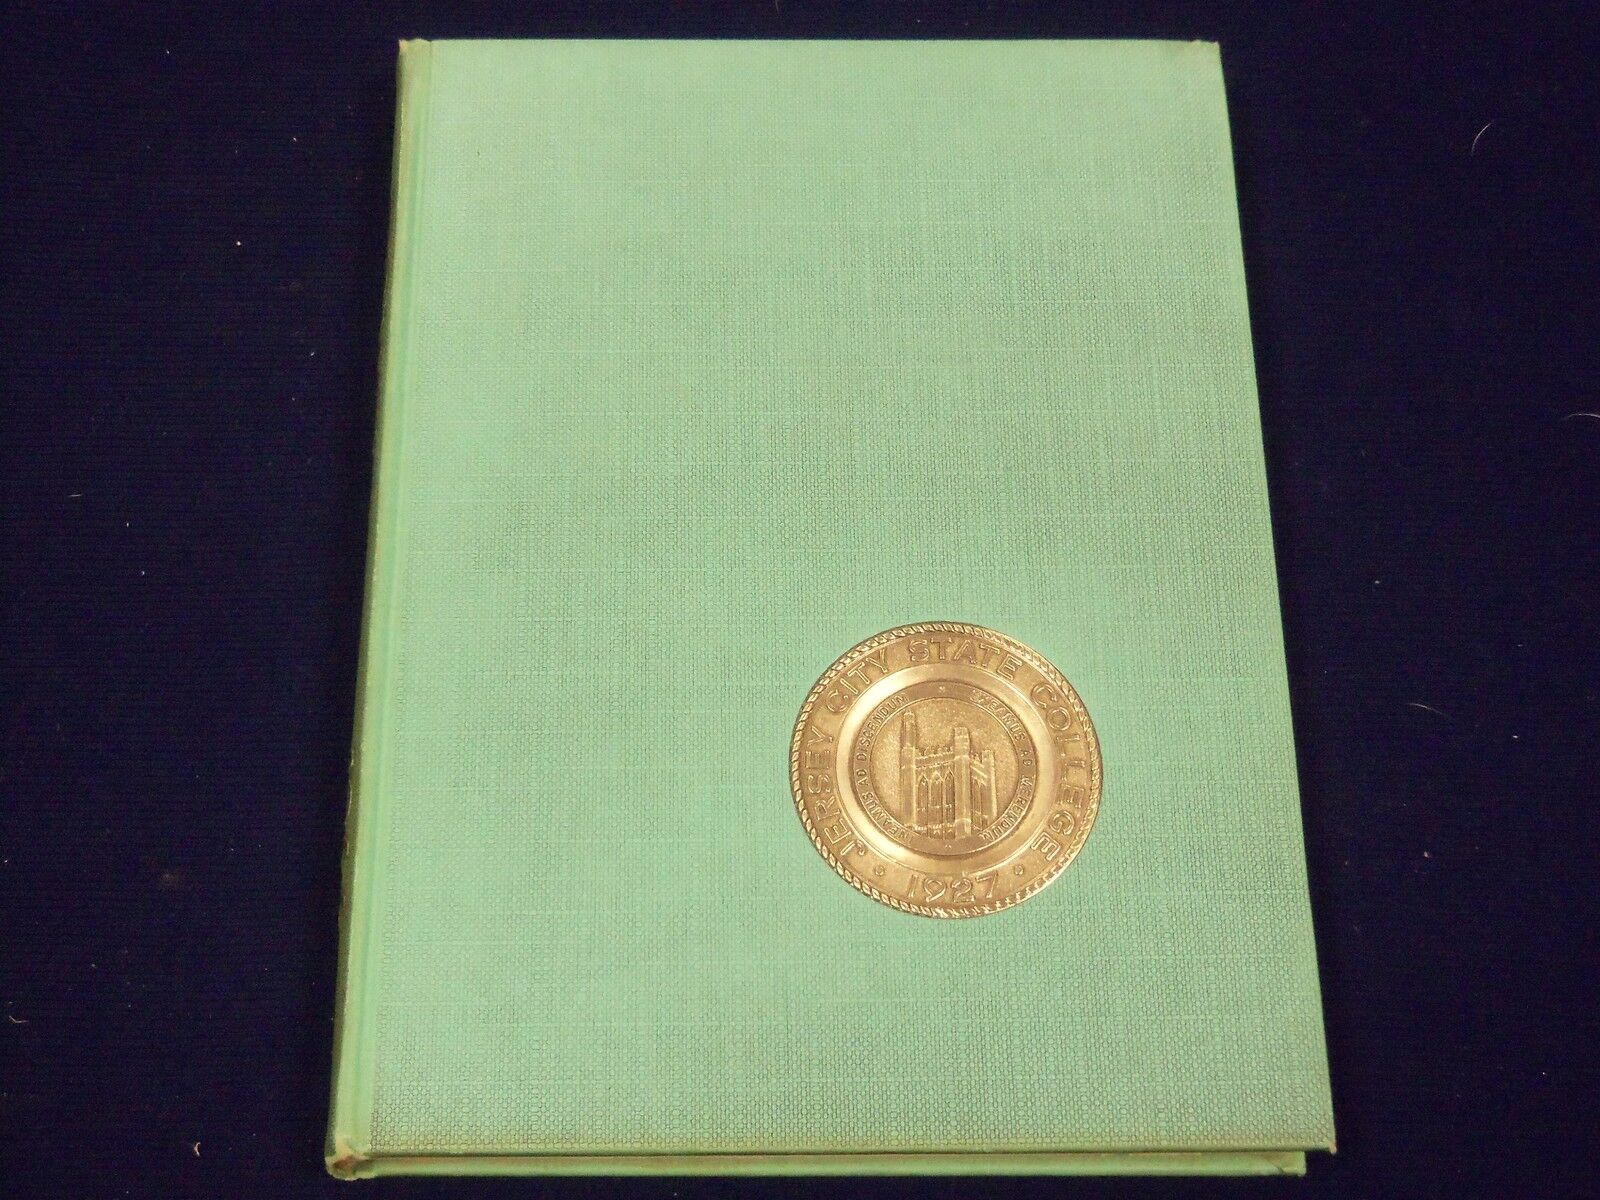 1966 TOWER JERSEY CITY STATE COLLEGE YEARBOOK - NJ - NICE PHOTOS - YB 649